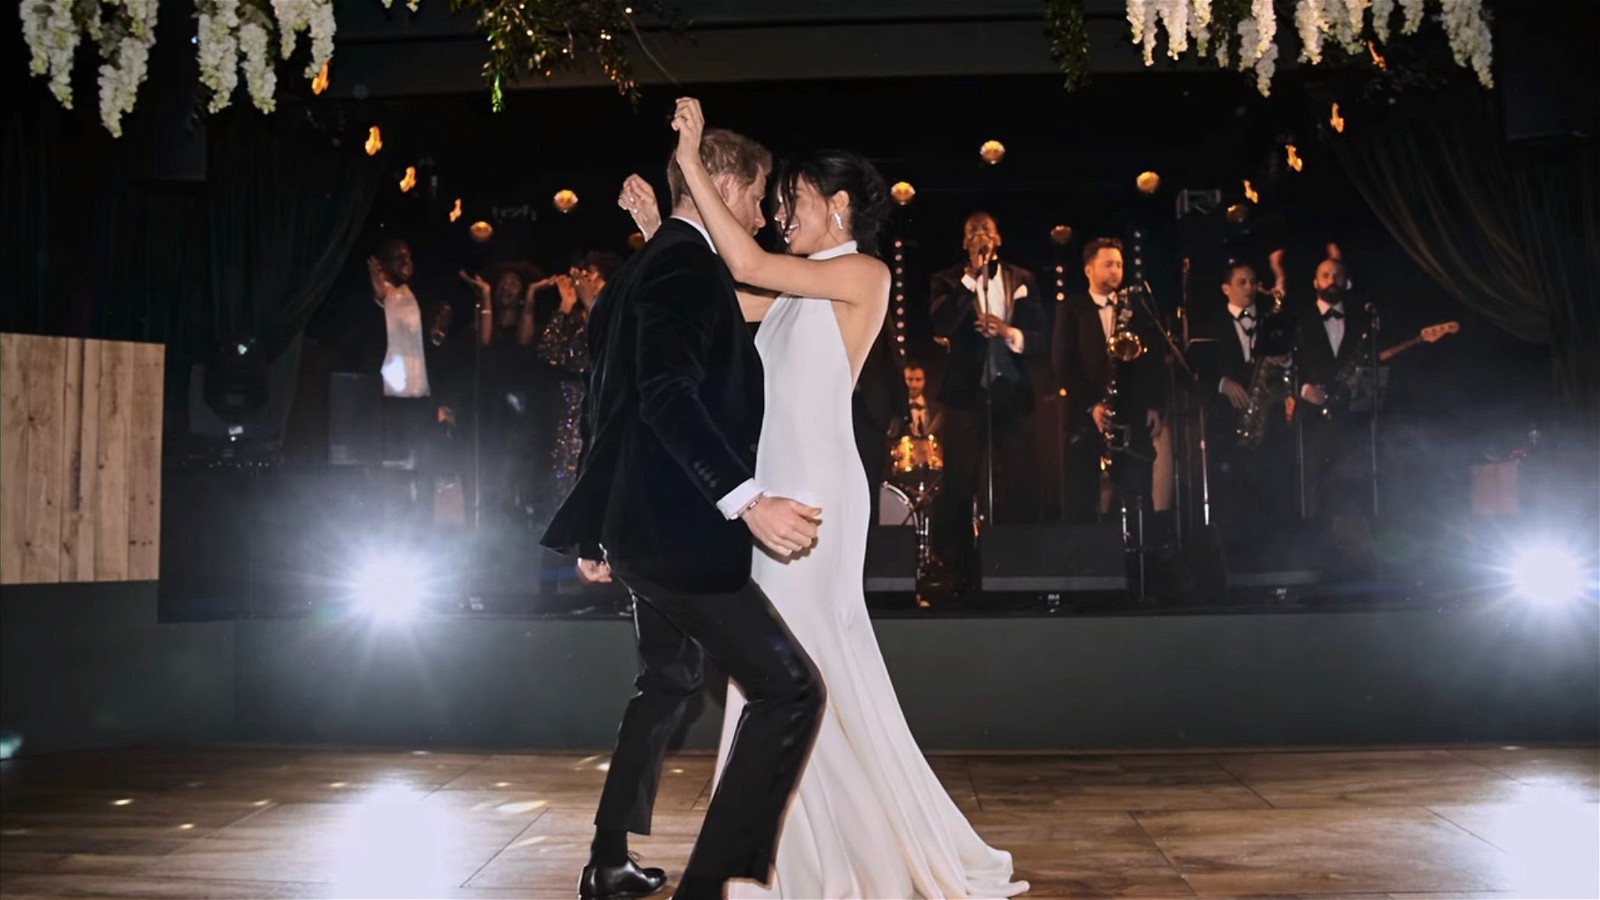 Meghan Markle and Prince Harry dancing at their wedding